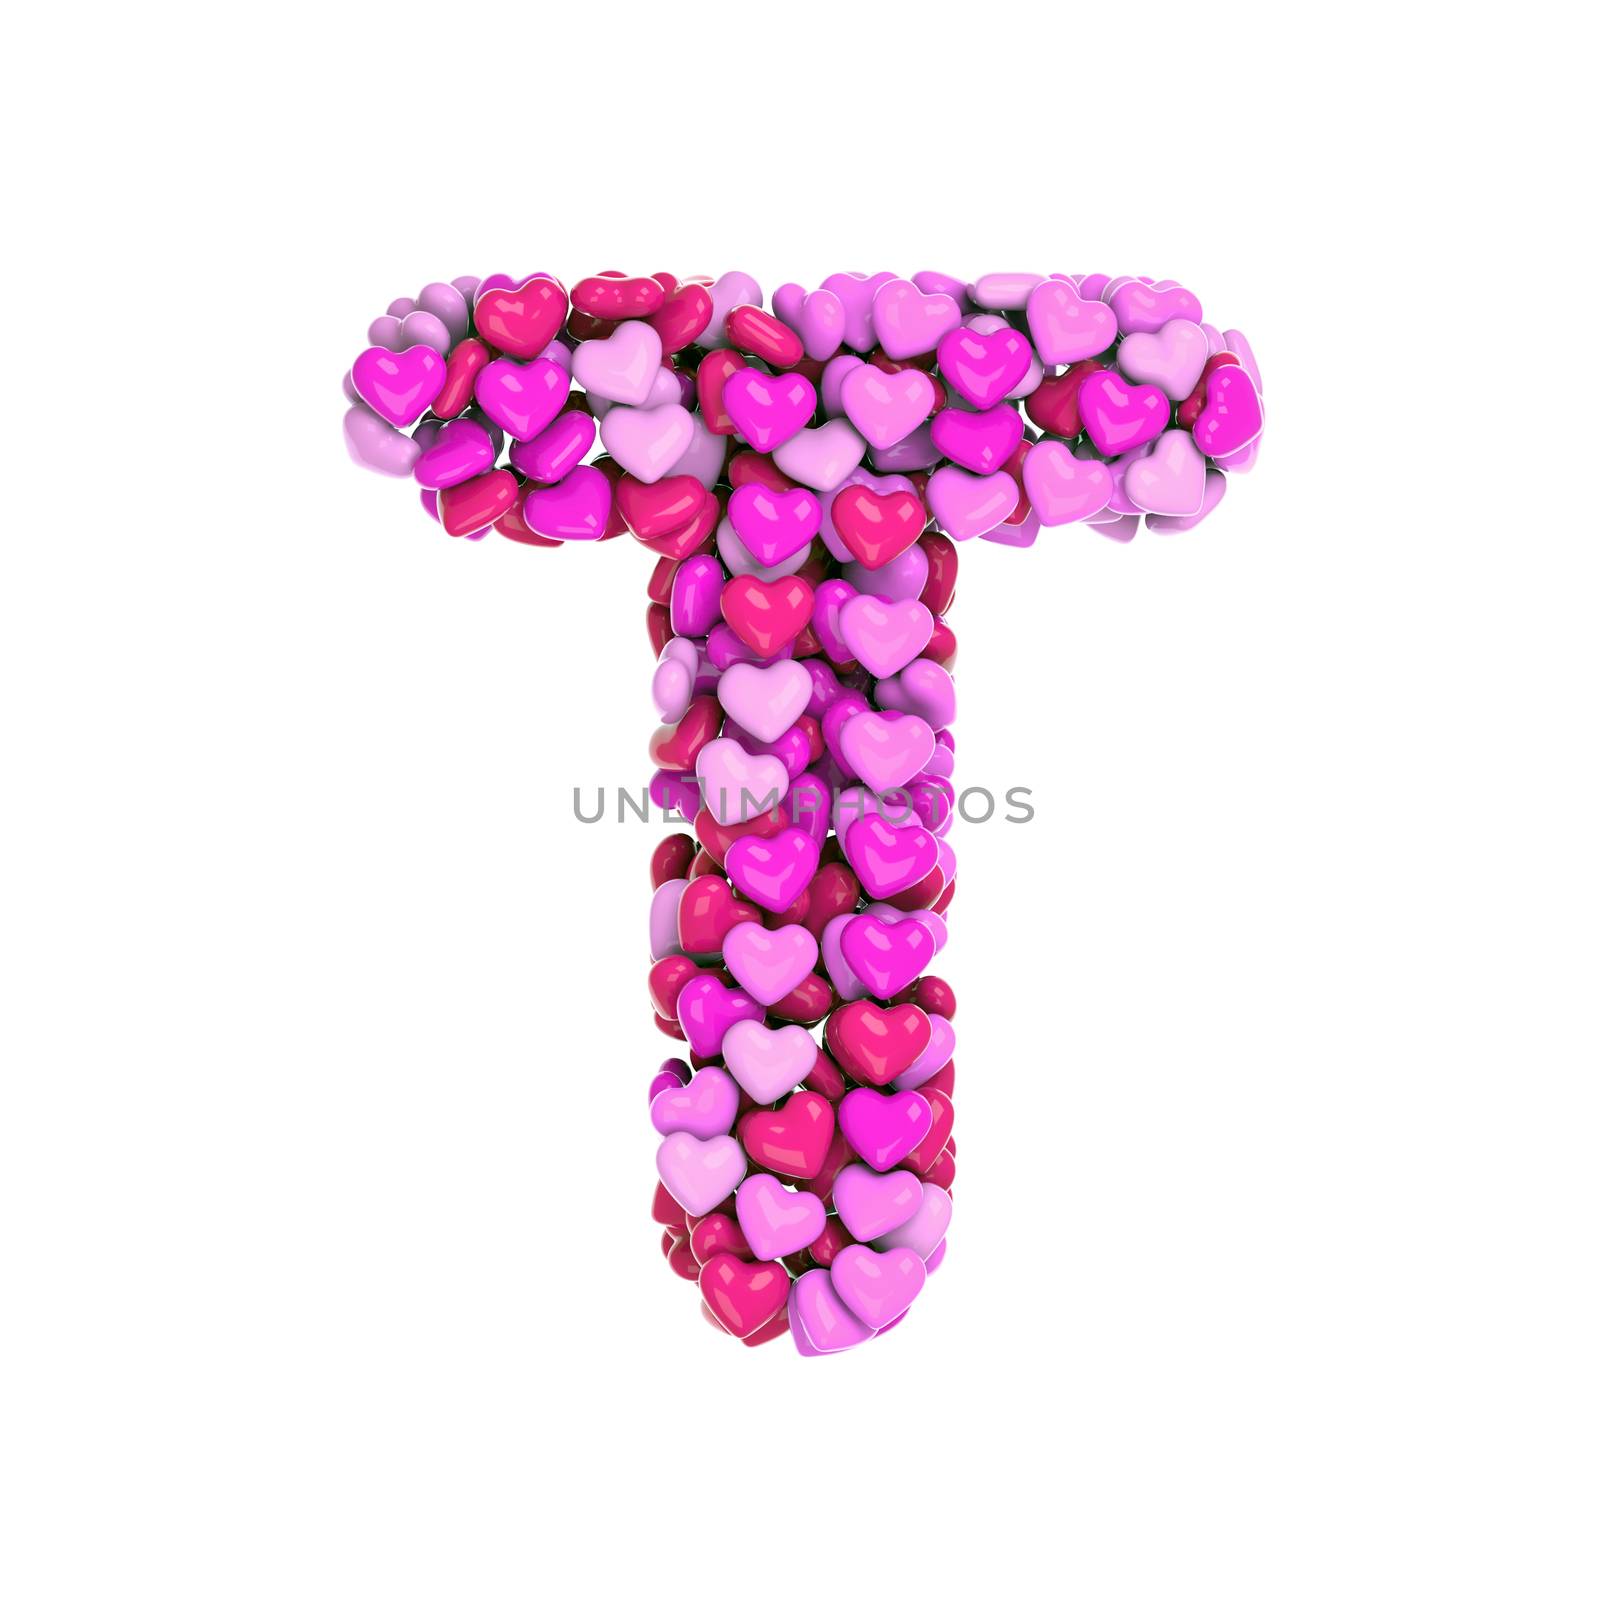 Valentine letter T - Capital 3d pink hearts font isolated on white background. This alphabet is perfect for creative illustrations related but not limited to Love, passion, wedding...